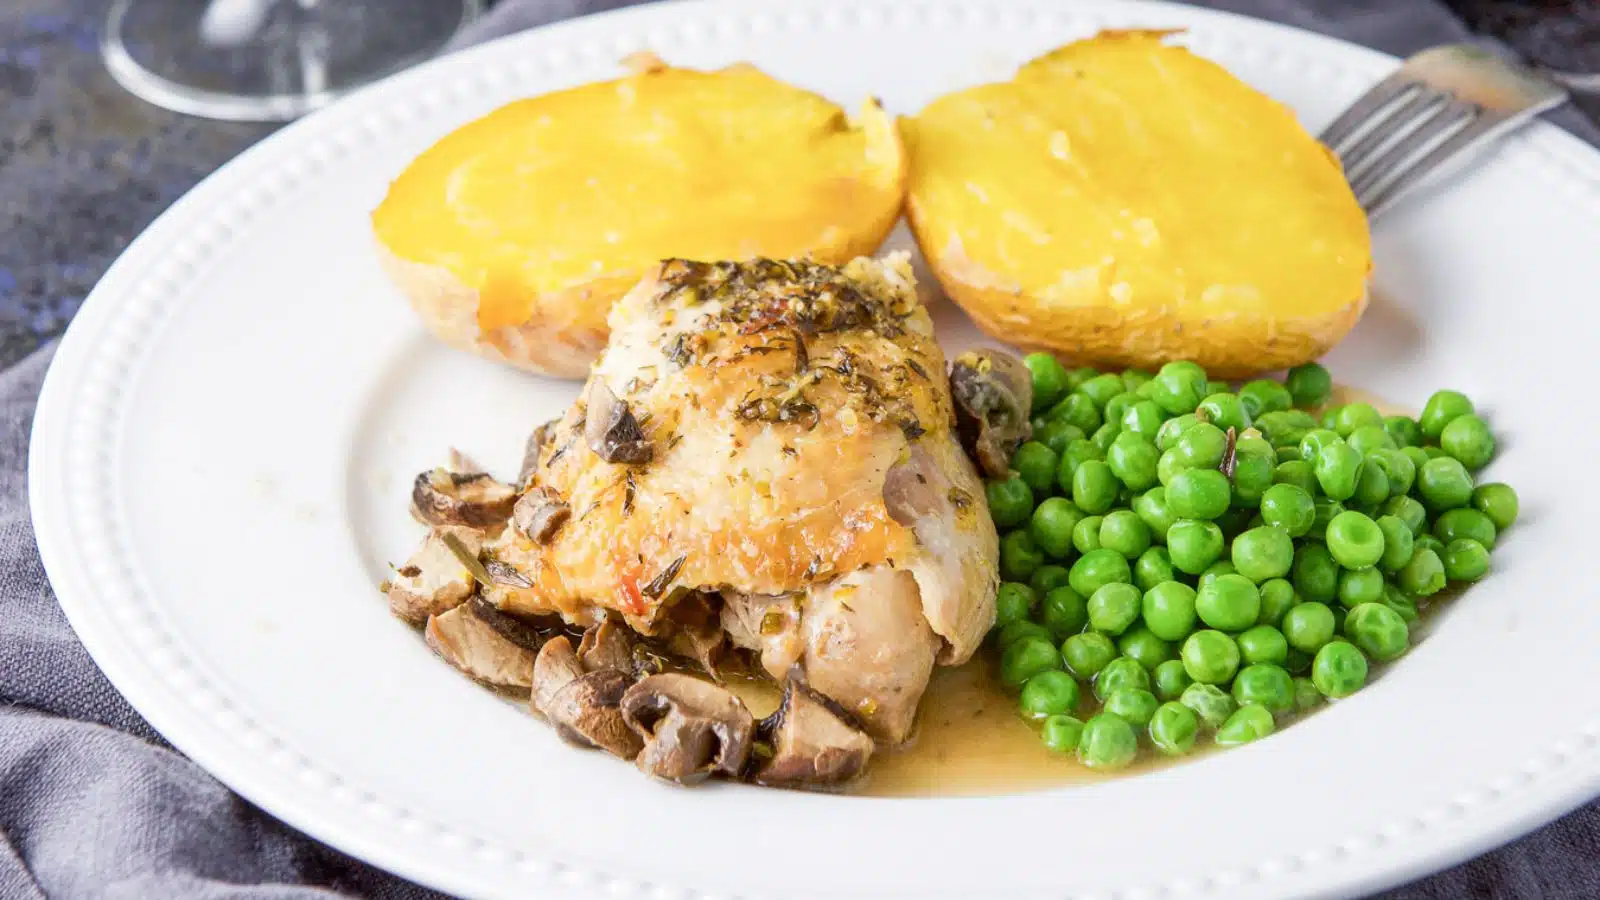 A white beaded plate with a chicken thigh with mushrooms and sauce, peas and baked potato